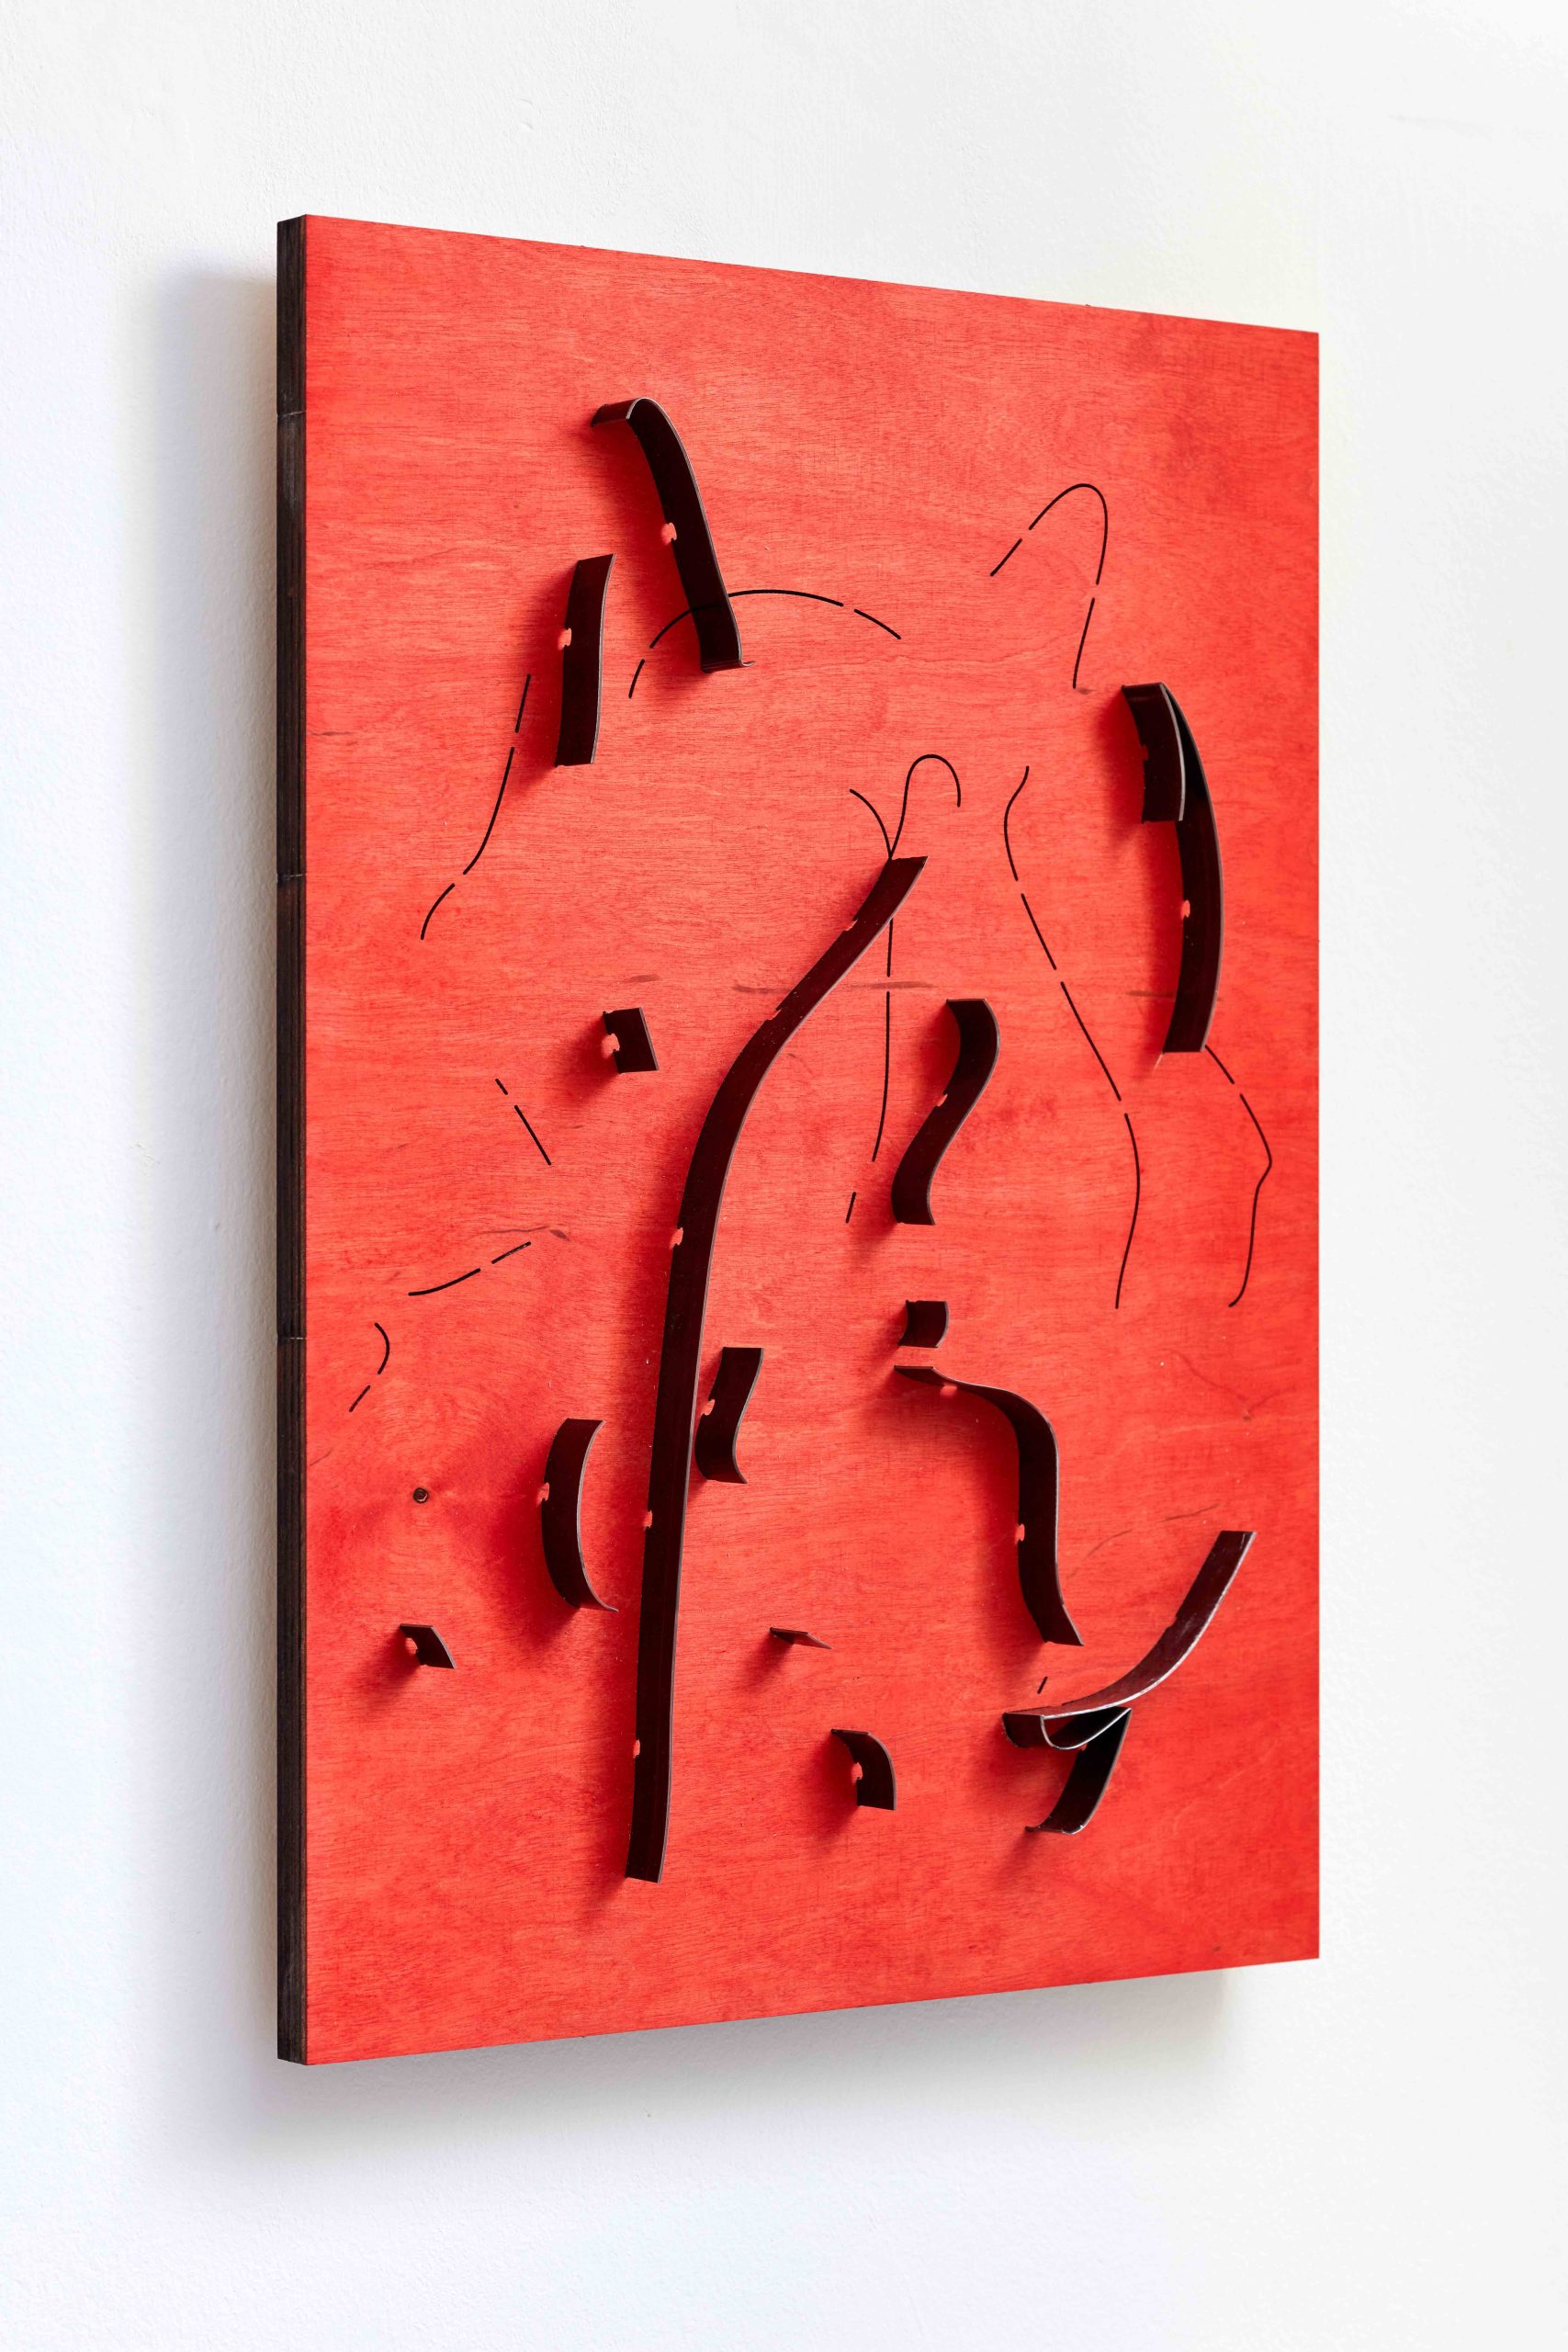 Gabor Kristof_Residue of a Master Narrative_2019_die cutting tool, powder coated blades, plywood_40x29cm_photo by David Biro_2